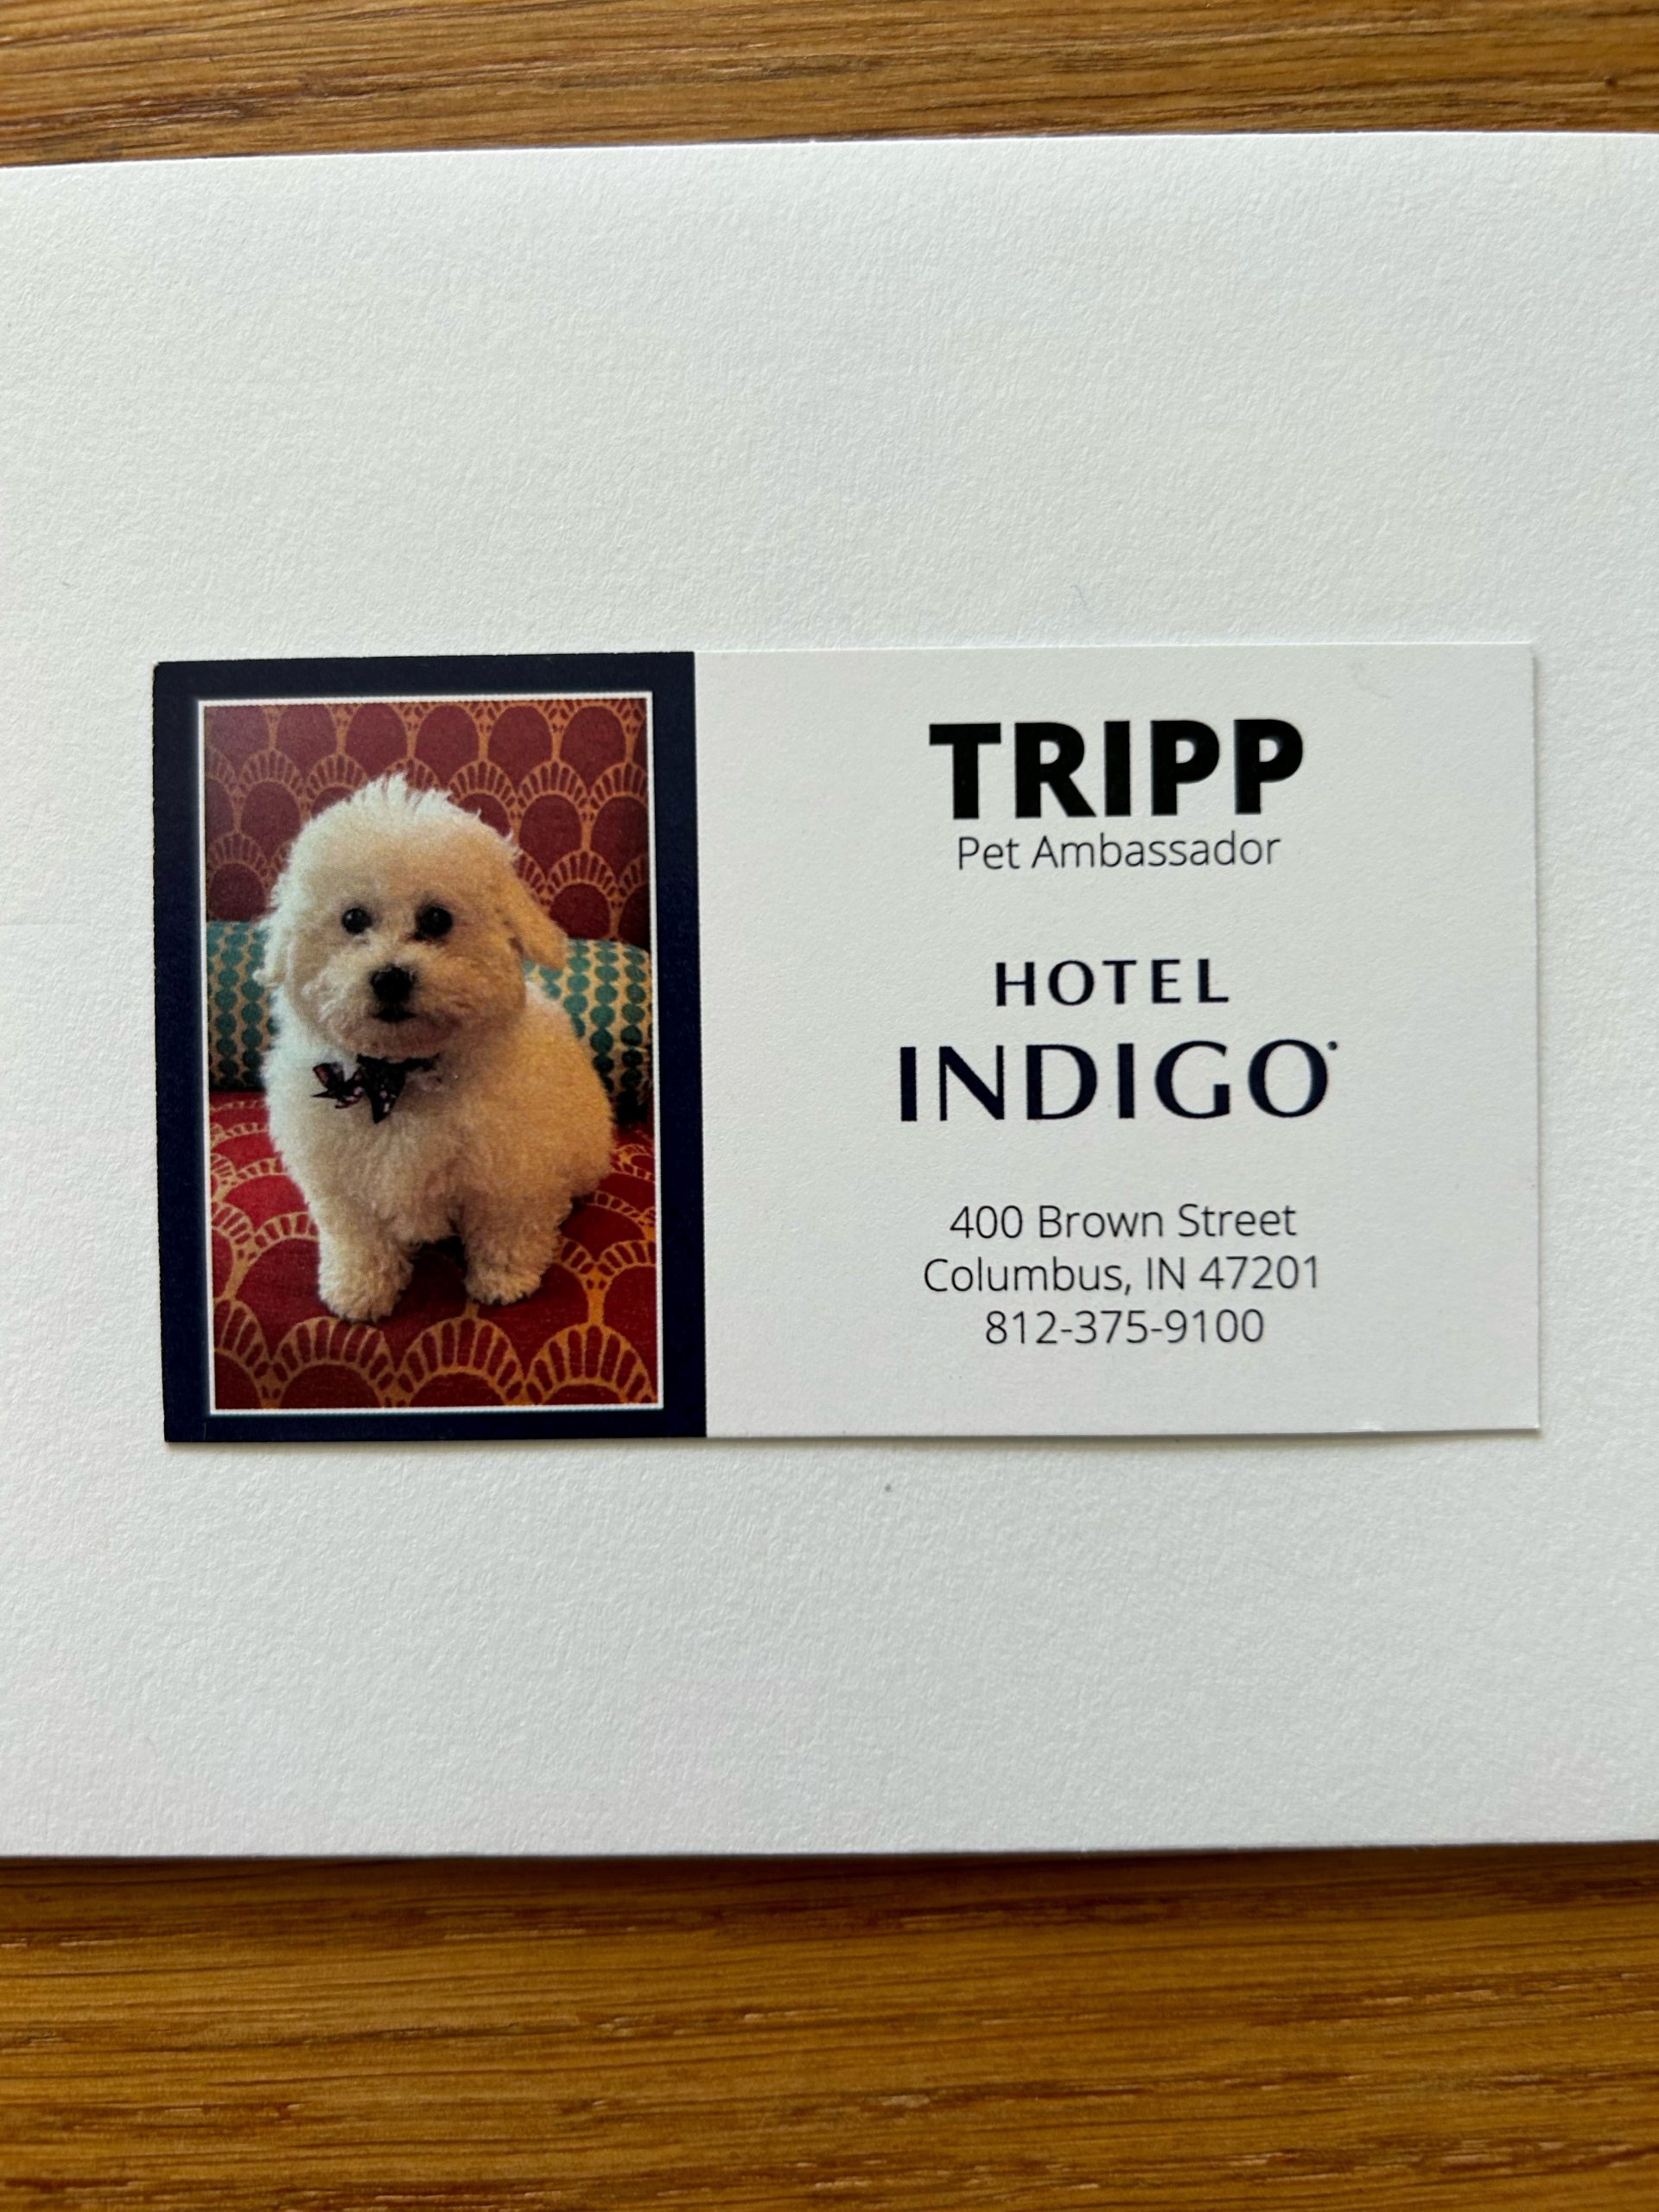 This image shows the business card of a little white dog, the hotel's pet ambassador